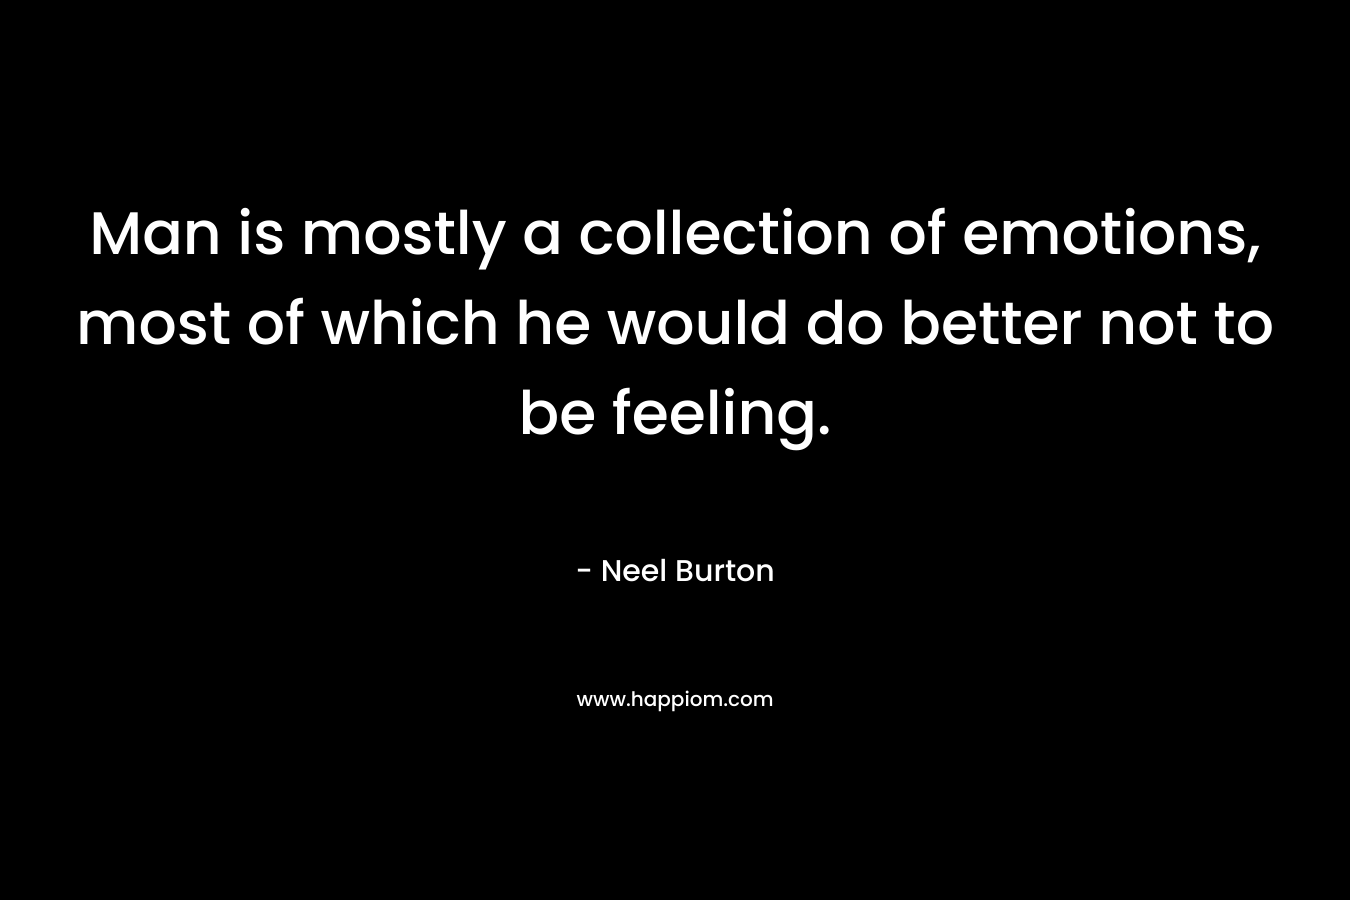 Man is mostly a collection of emotions, most of which he would do better not to be feeling.